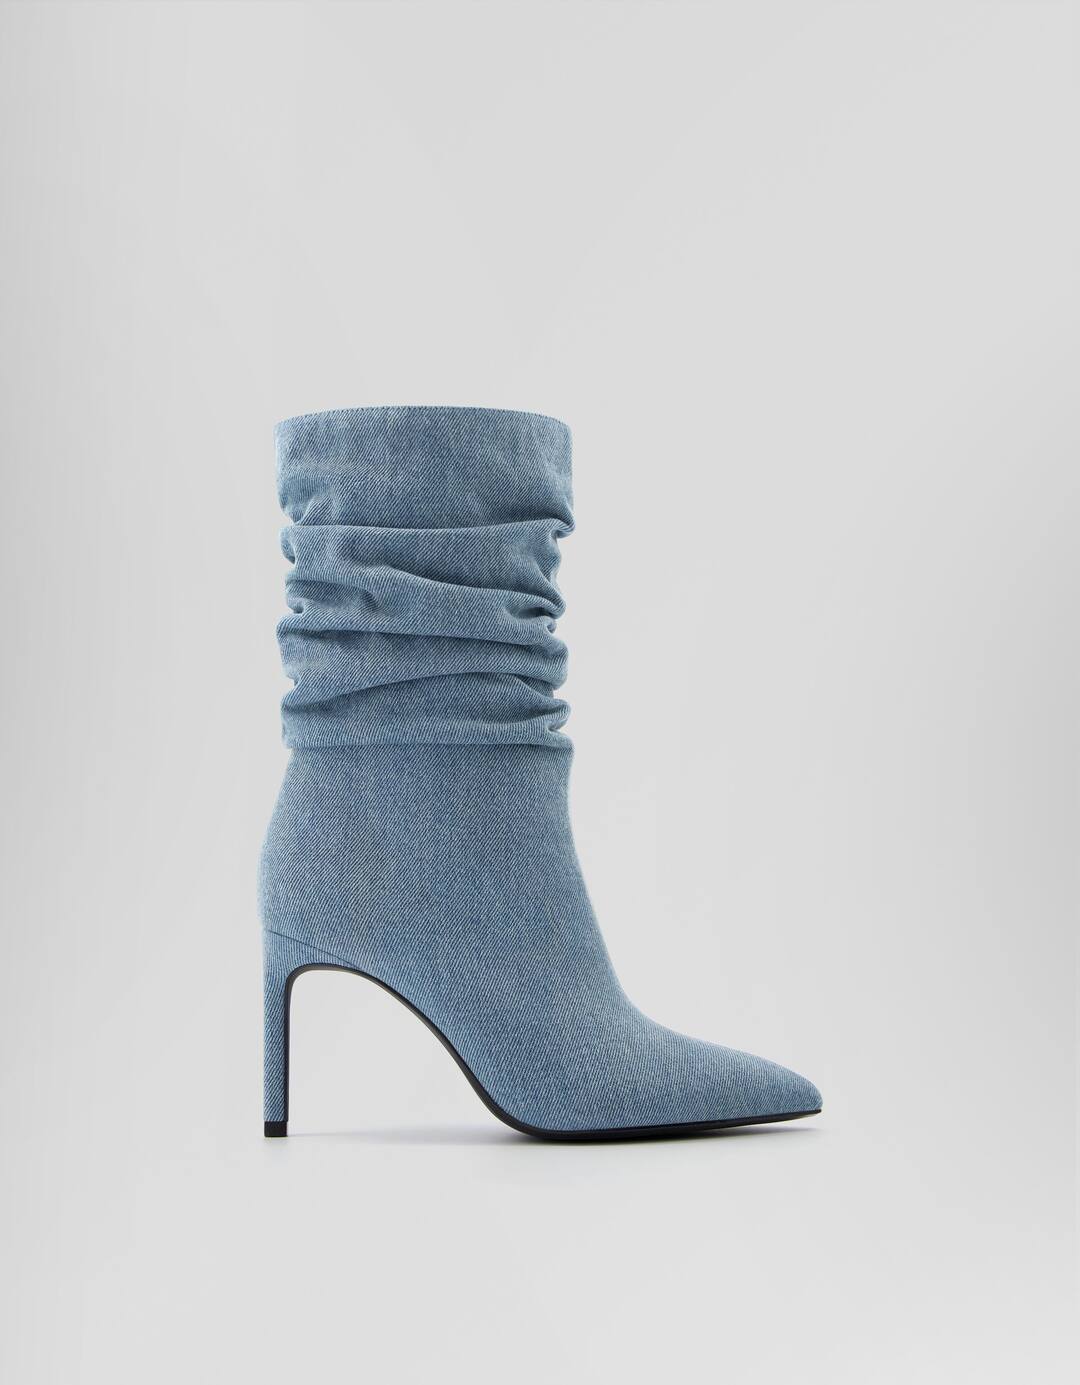 Slouchy heeled denim ankle boots